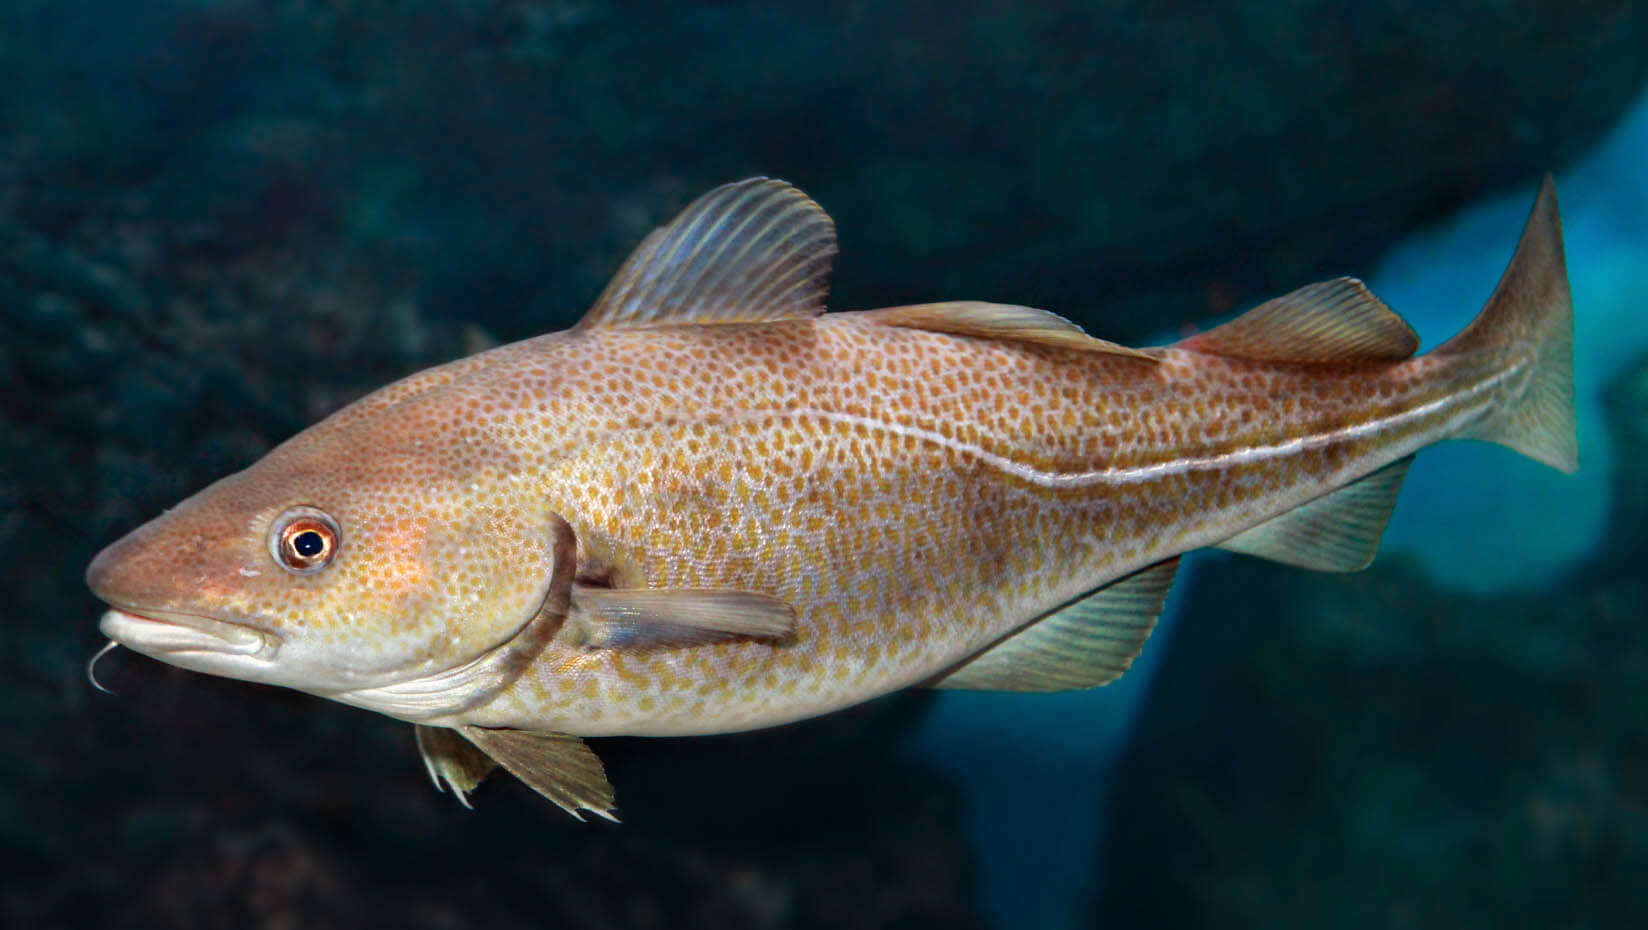 featured image for Fish are shrinking, according to new study co-authored by McGill